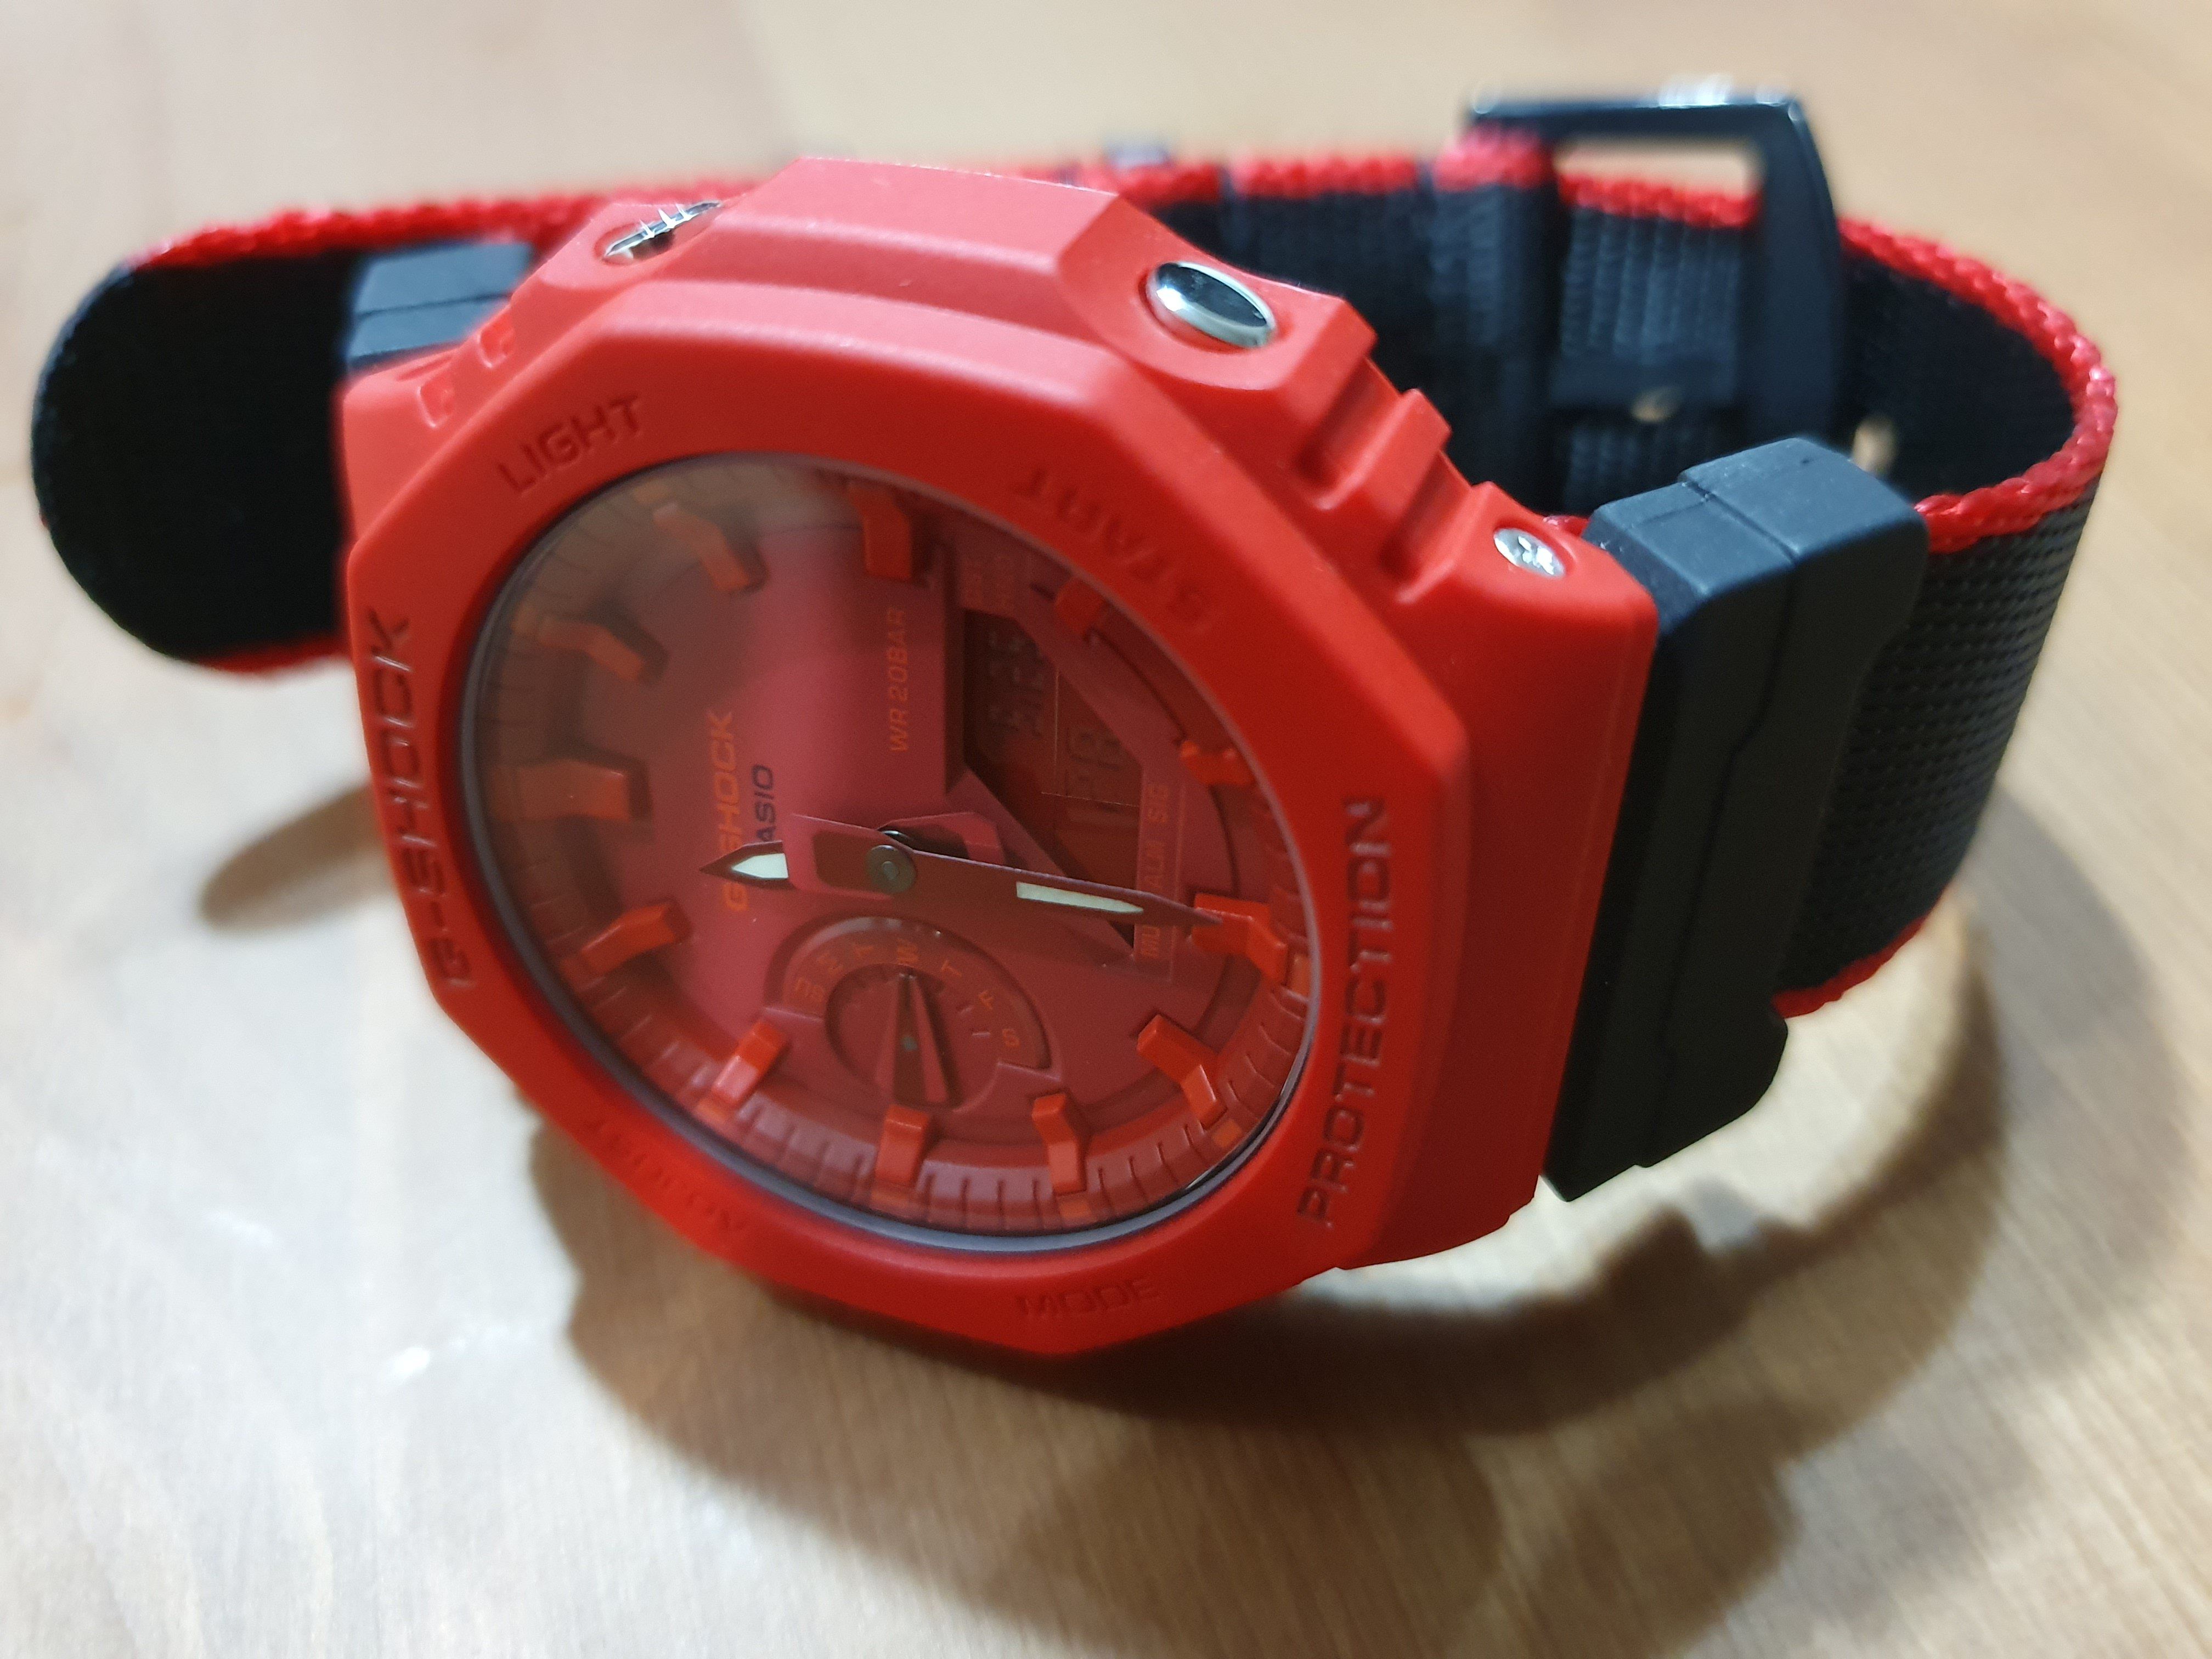 Check out this GShock GA2100 on Vario Seat Belt